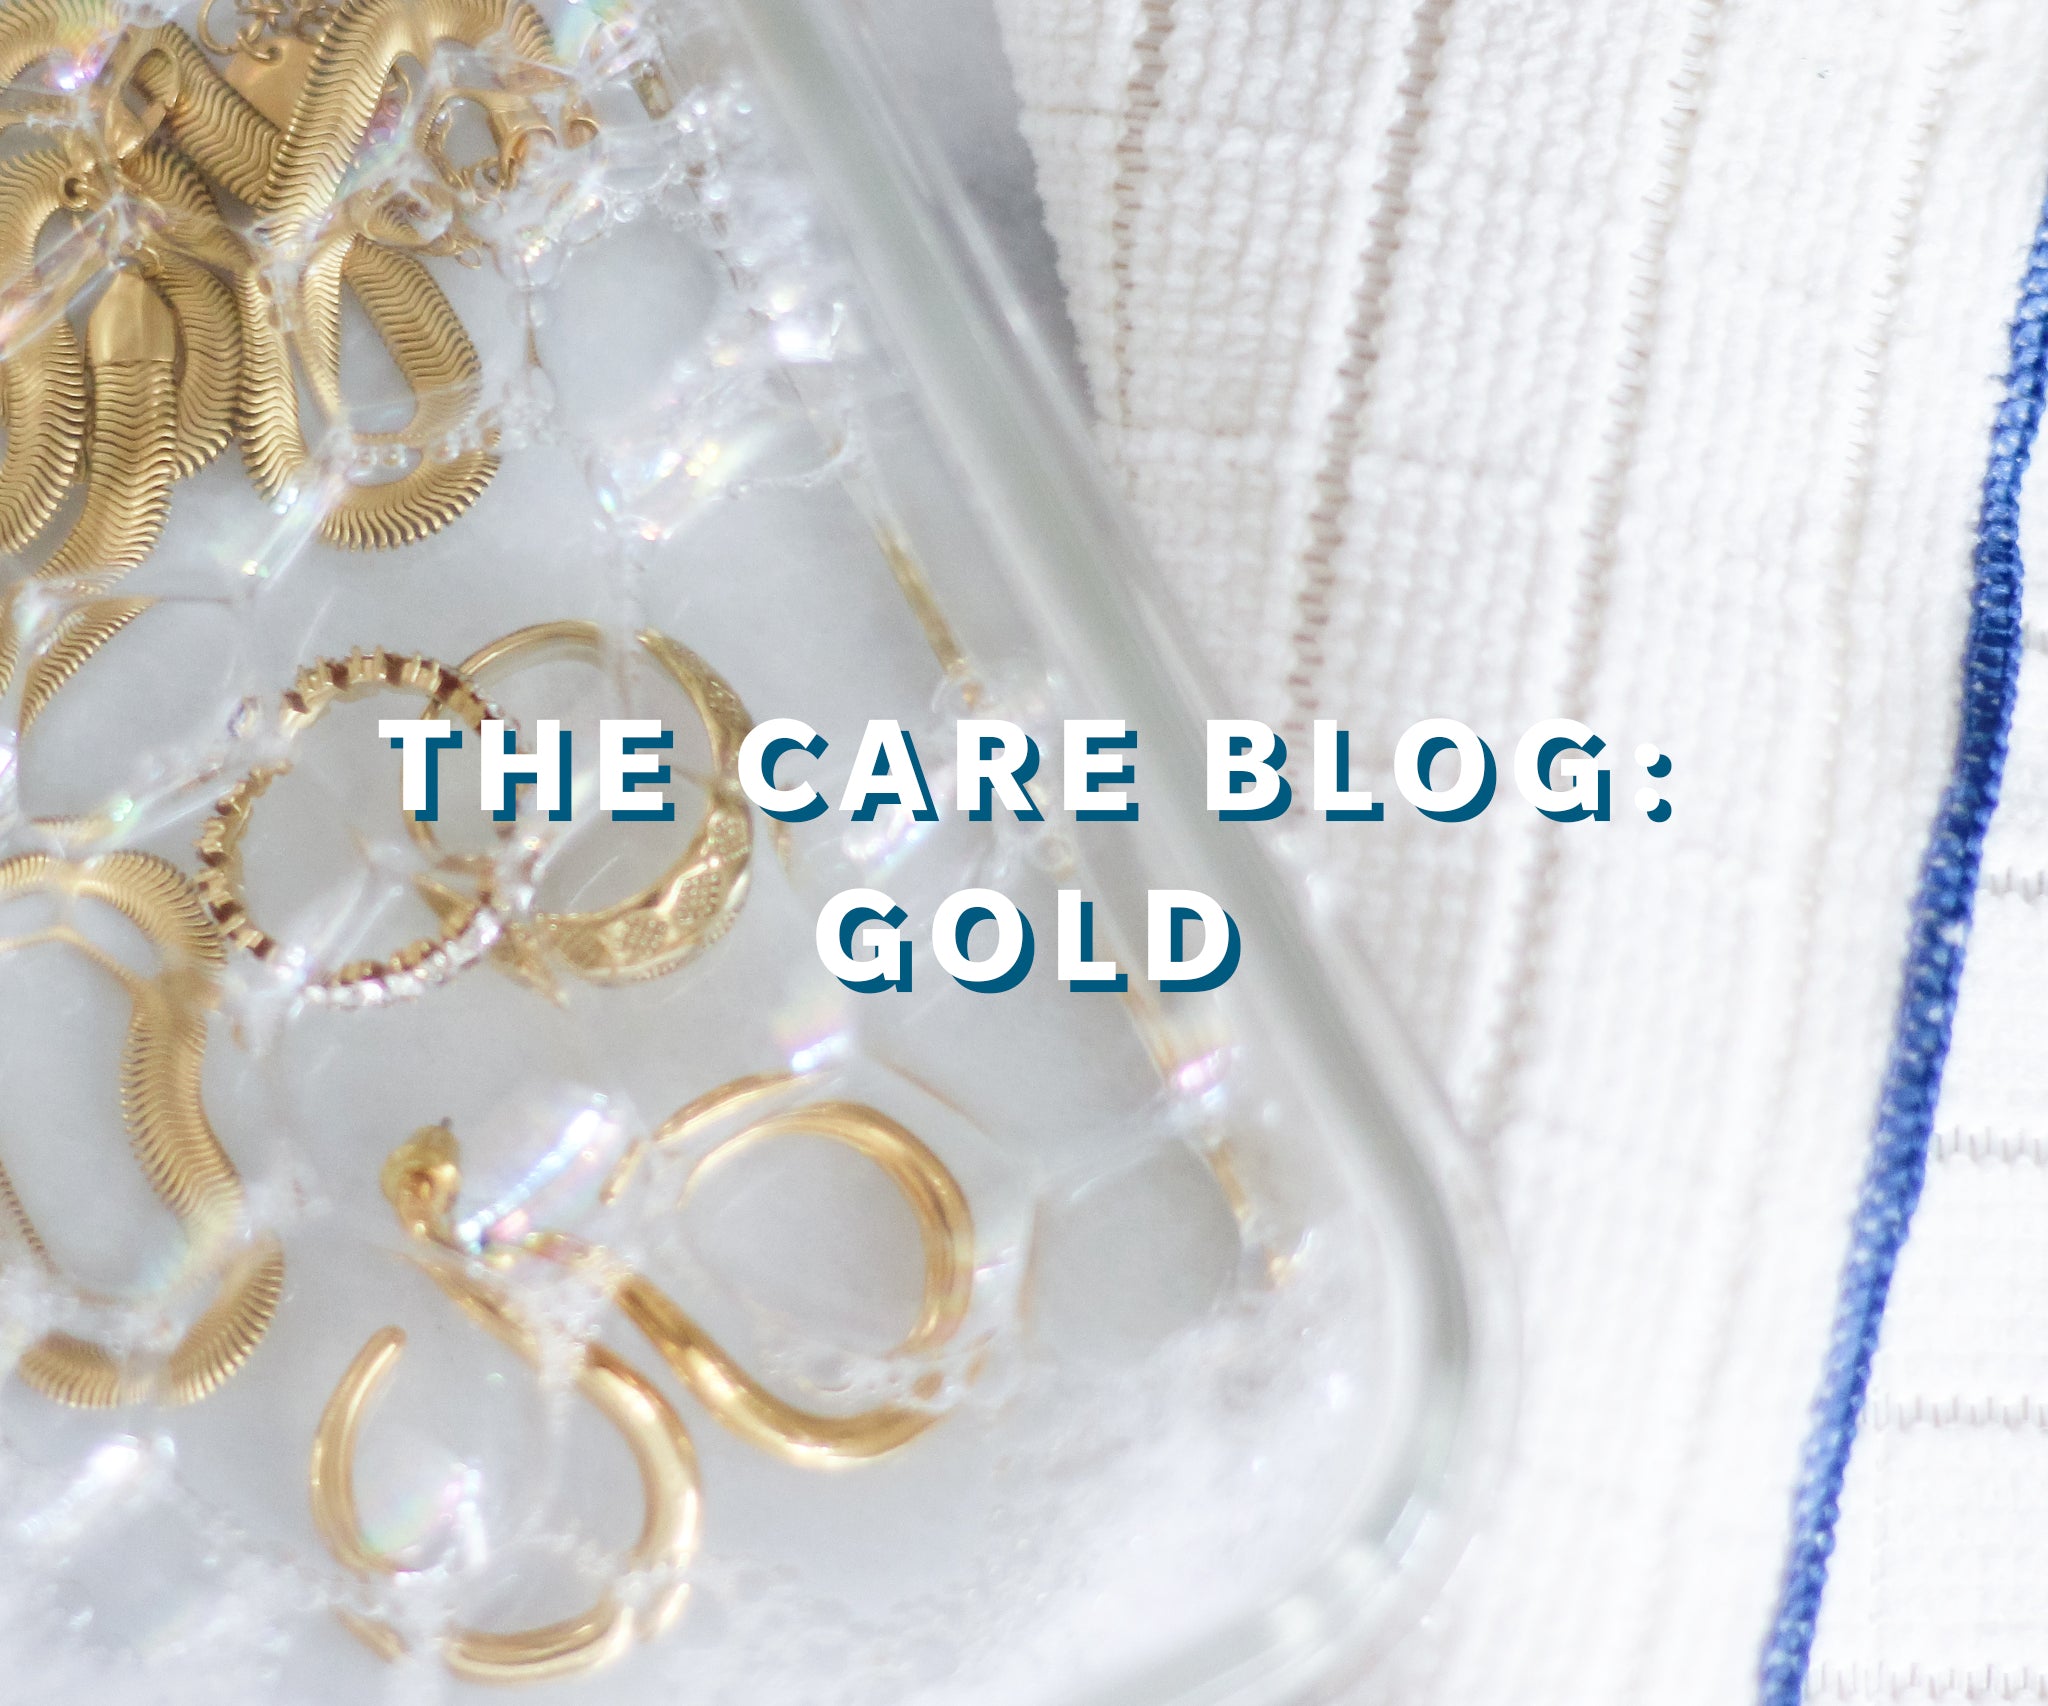 The Care Blog: Gold